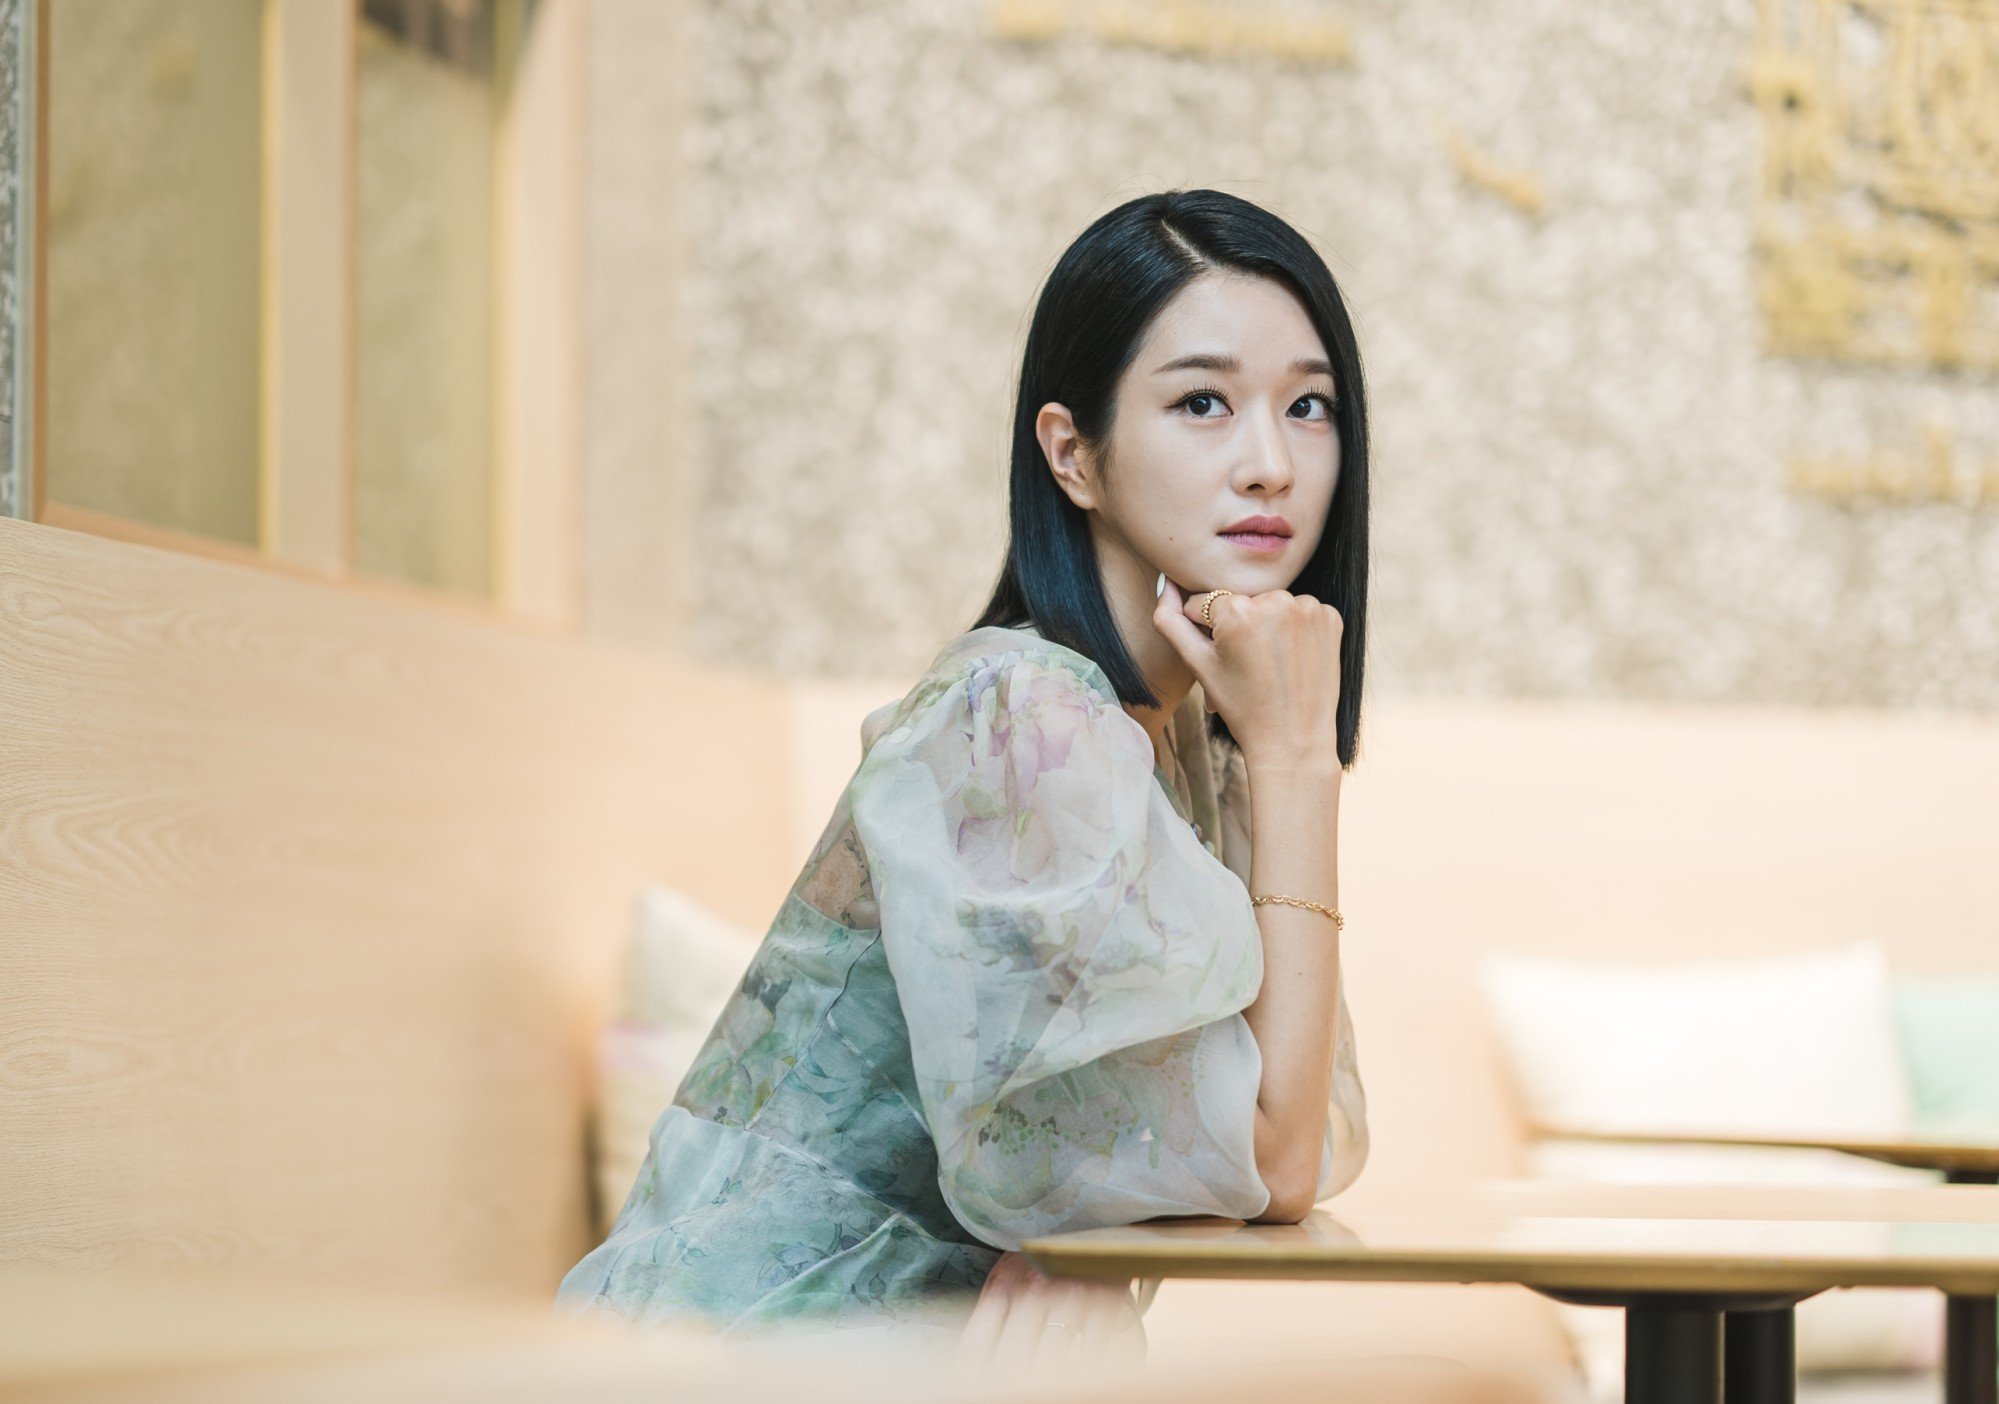 Seo Ye-ji was dropped by several brands after her controlling behaviour came to light. Photo: Netflix